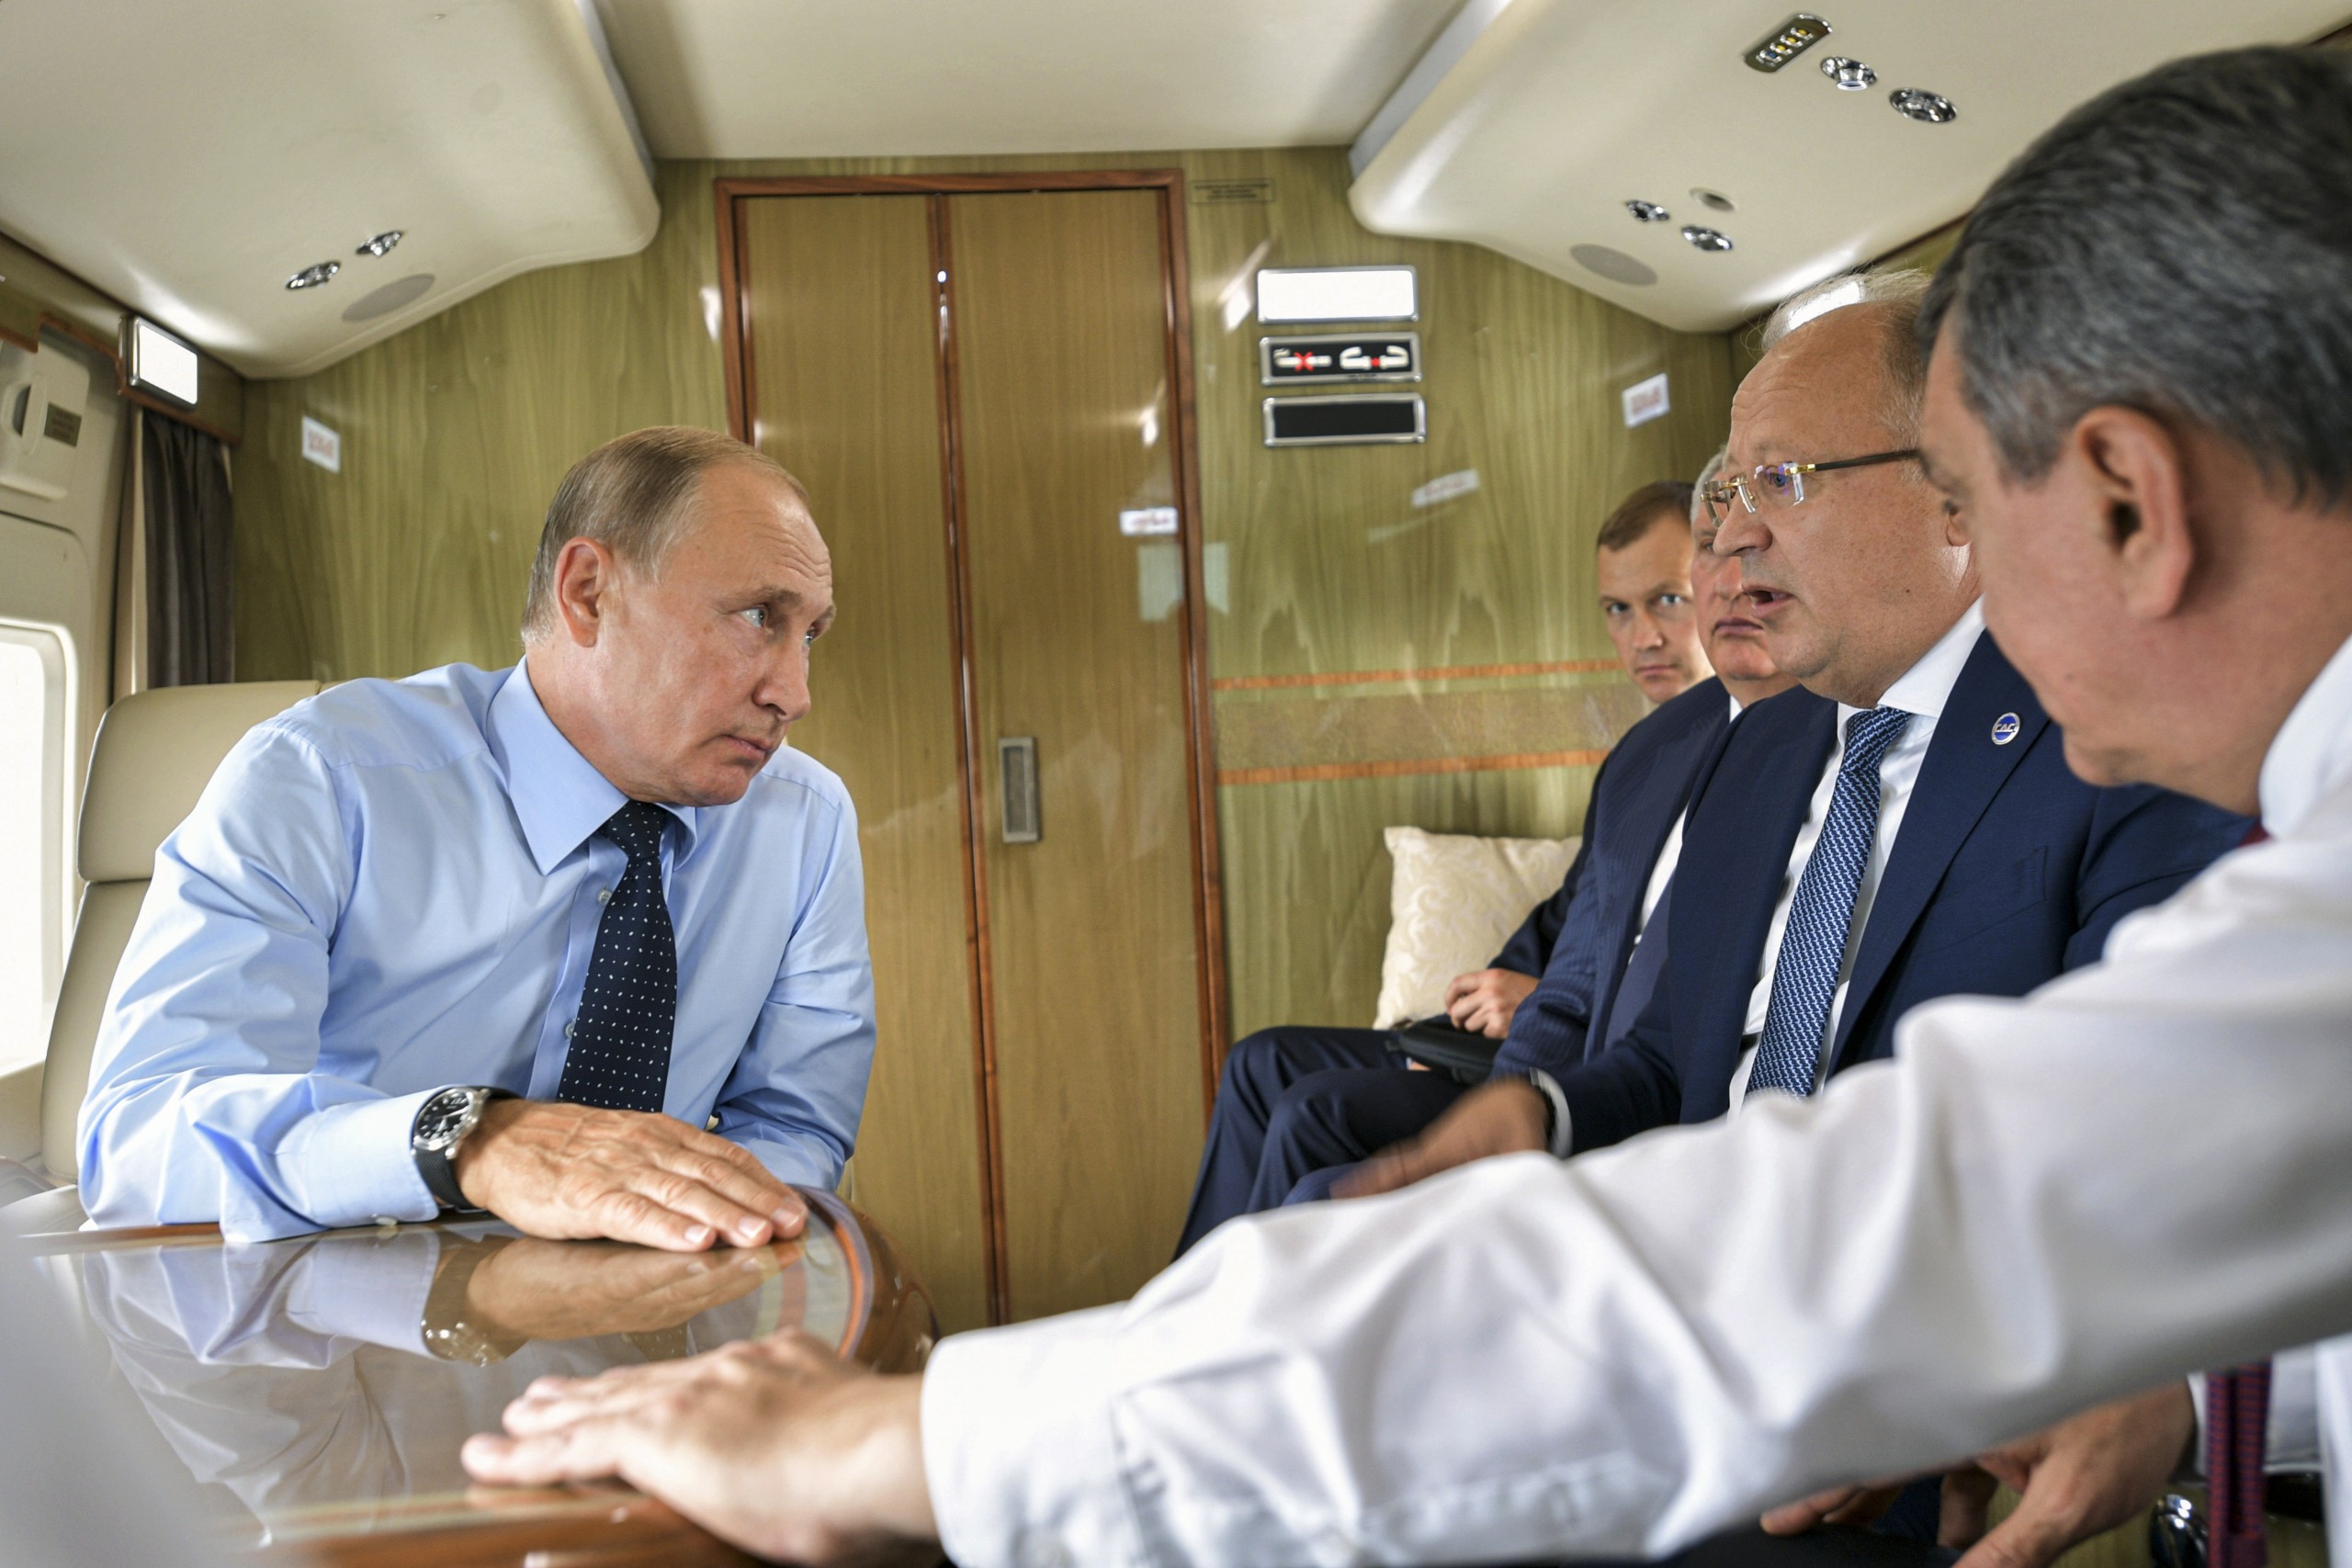 epa09643073 (FILE) - Russian President Vladimir Putin (L) and the owner of the Listvyazhnaya mine and chairman of the Siberian Business Union Mikhail Fedyayev (2R) speak on board a helicopter en route to the Chernigovets coal mine in the Kemerovo Region Russia, 27 August 2018 (issued on 15 December 2021). The Investigative Committee of the Russian Federation announced on 15 December 2021 the arrest of the chairman of the board of directors of SDS-Ugol Mikhail Fedyaev the owner of the Listvyazhnaya mine, where 51 people died as a result of an accident at the end of November. Mikhail Fedyaev has repeatedly been included in various lists of the richest businessmen in Russia - two years ago, in the ranking of 200 richest businessmen according to Forbes, he took 177th place. The publication then estimated his fortune as of 2019 at 550 million US dollars.  EPA/ALEXEI DRUZHININ / SPUTNIK / KREMLIN POOL